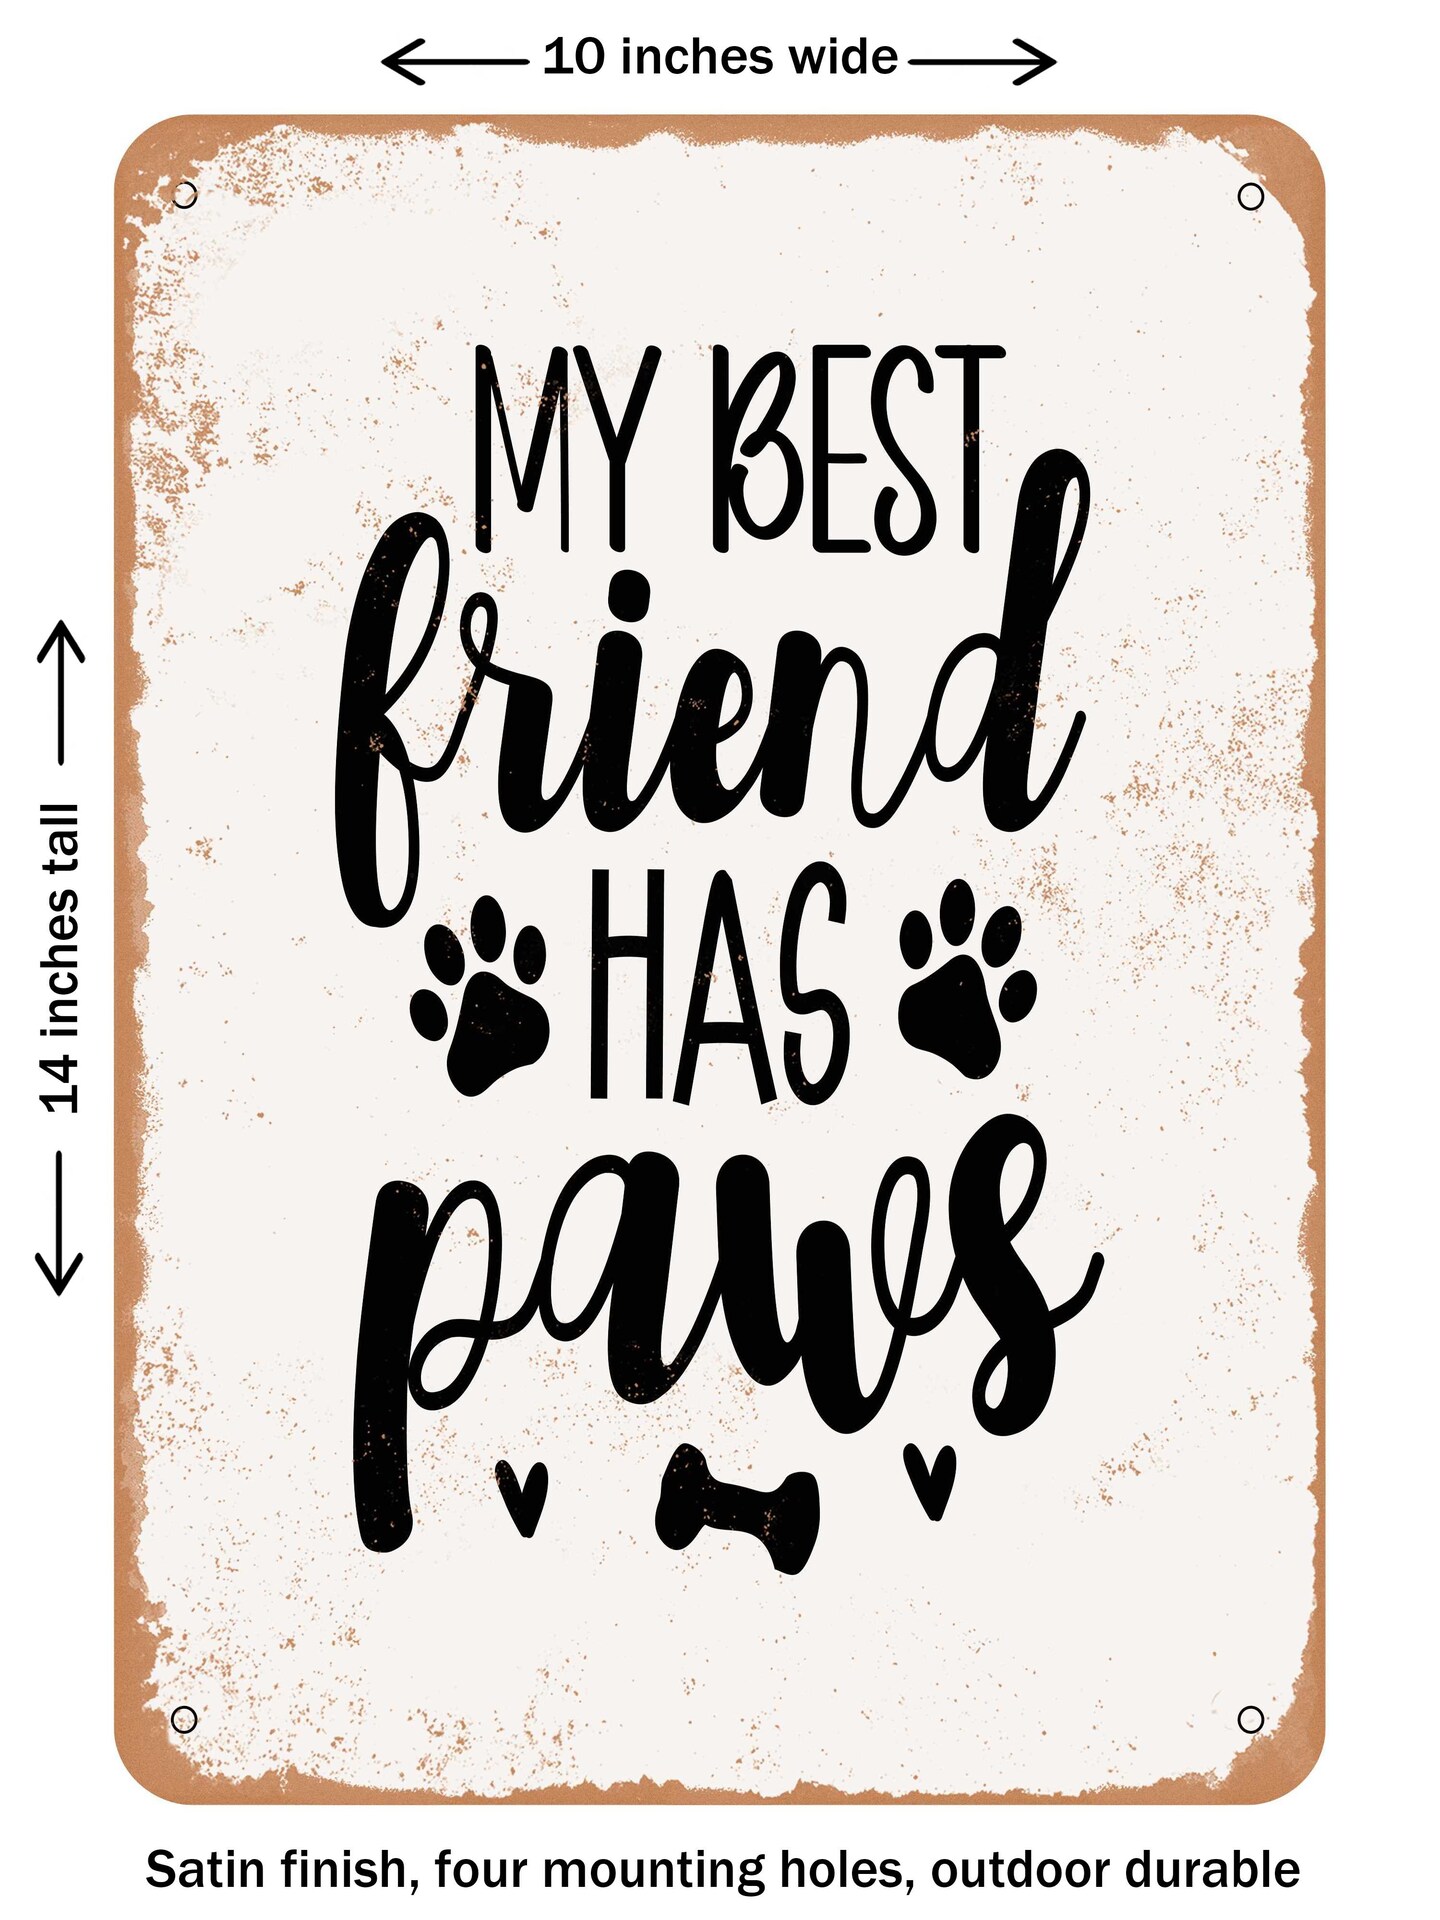 DECORATIVE METAL SIGN - My Best Friend Has Paws  - Vintage Rusty Look